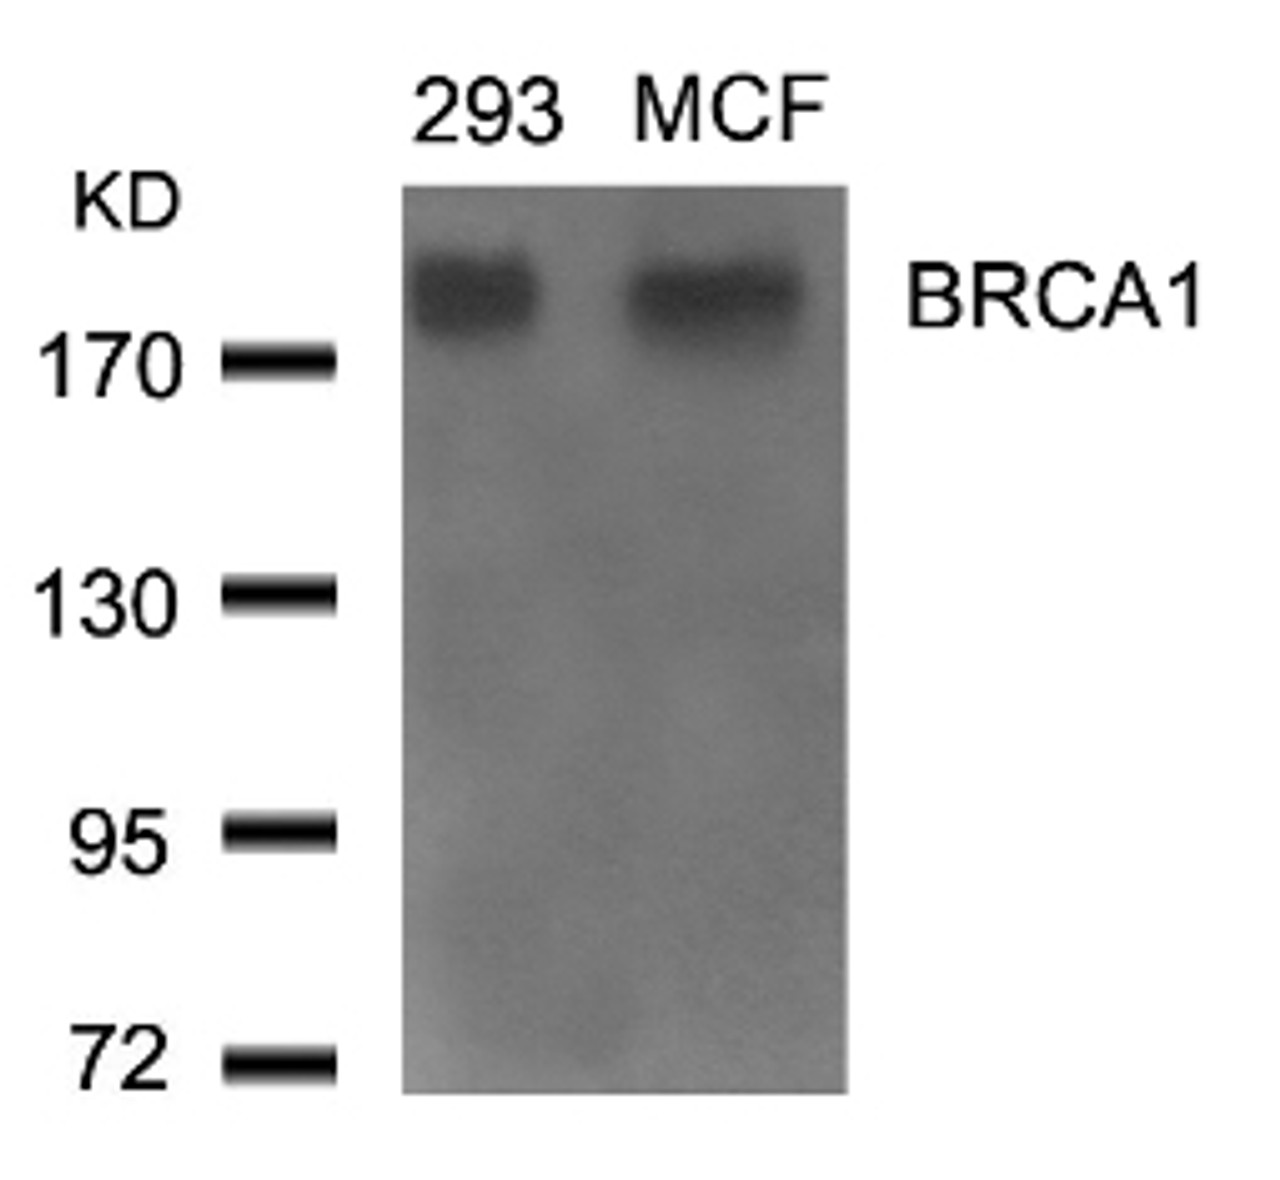 Western blot analysis of lysed extracts from 293 and MCF cells using BRCA1 (Ab-1524) .